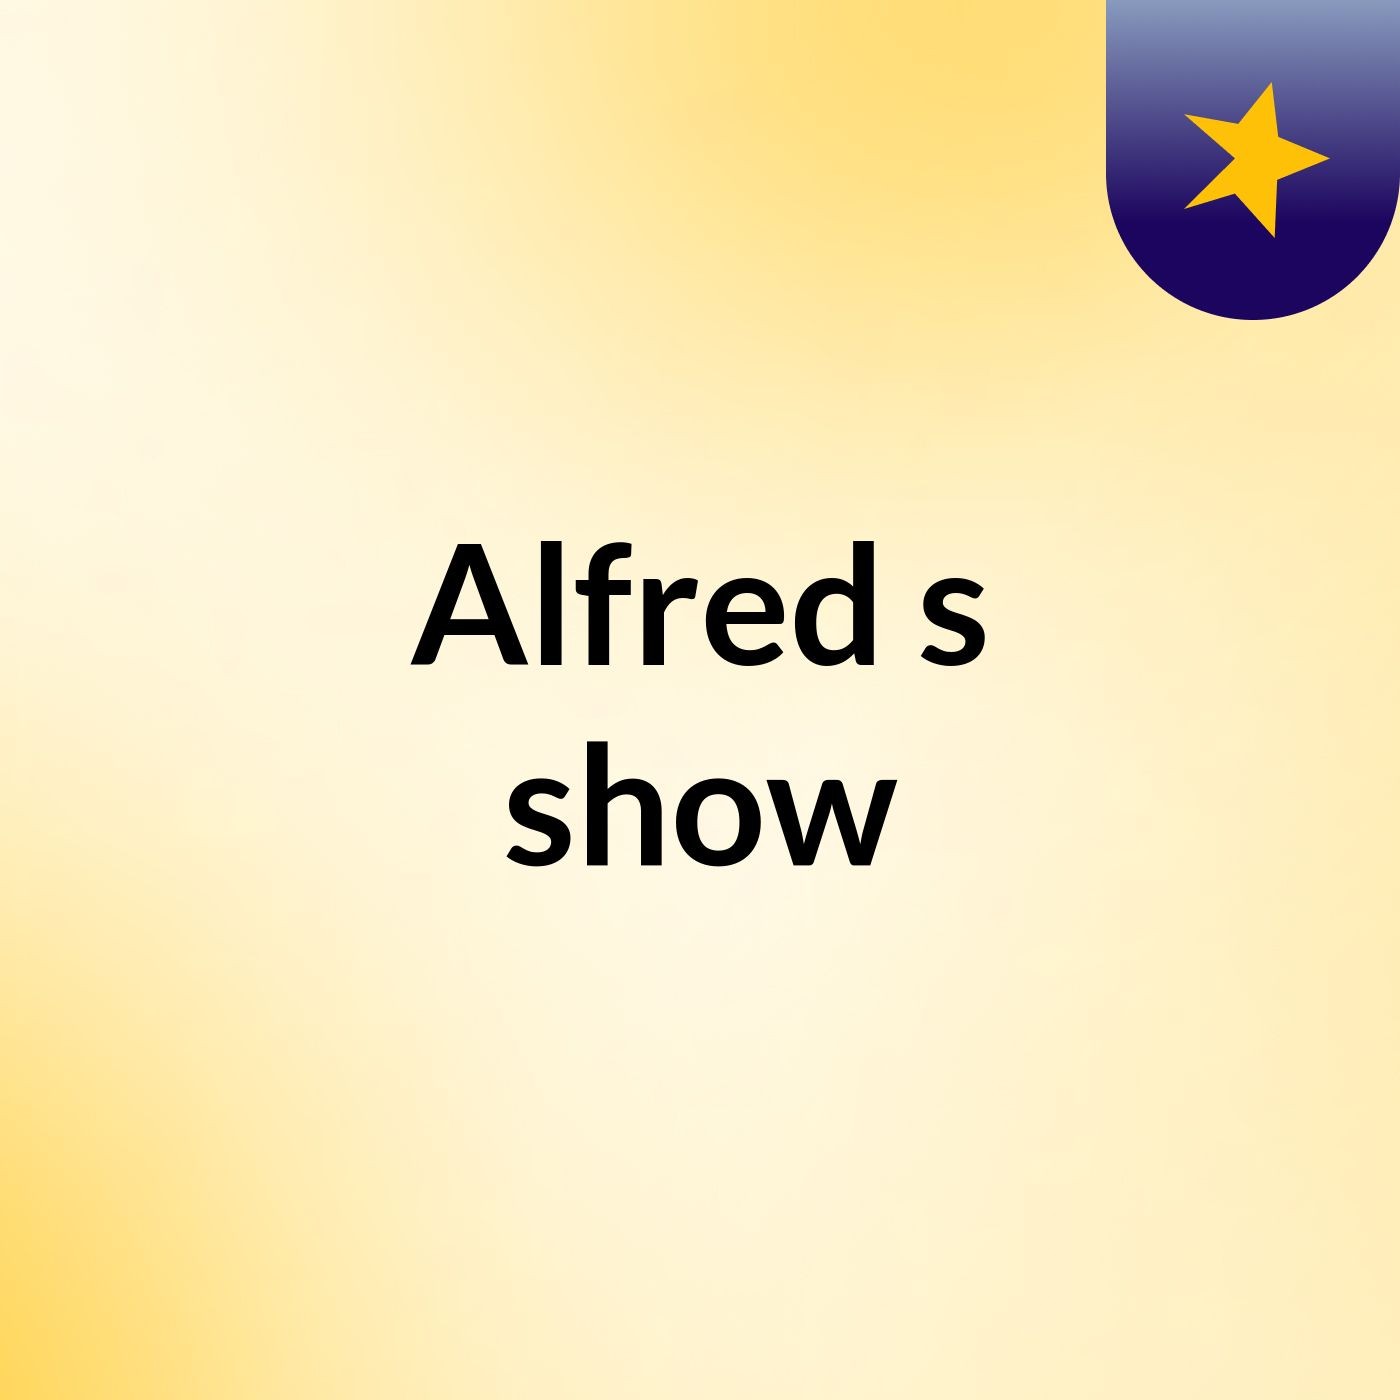 Alfred's show